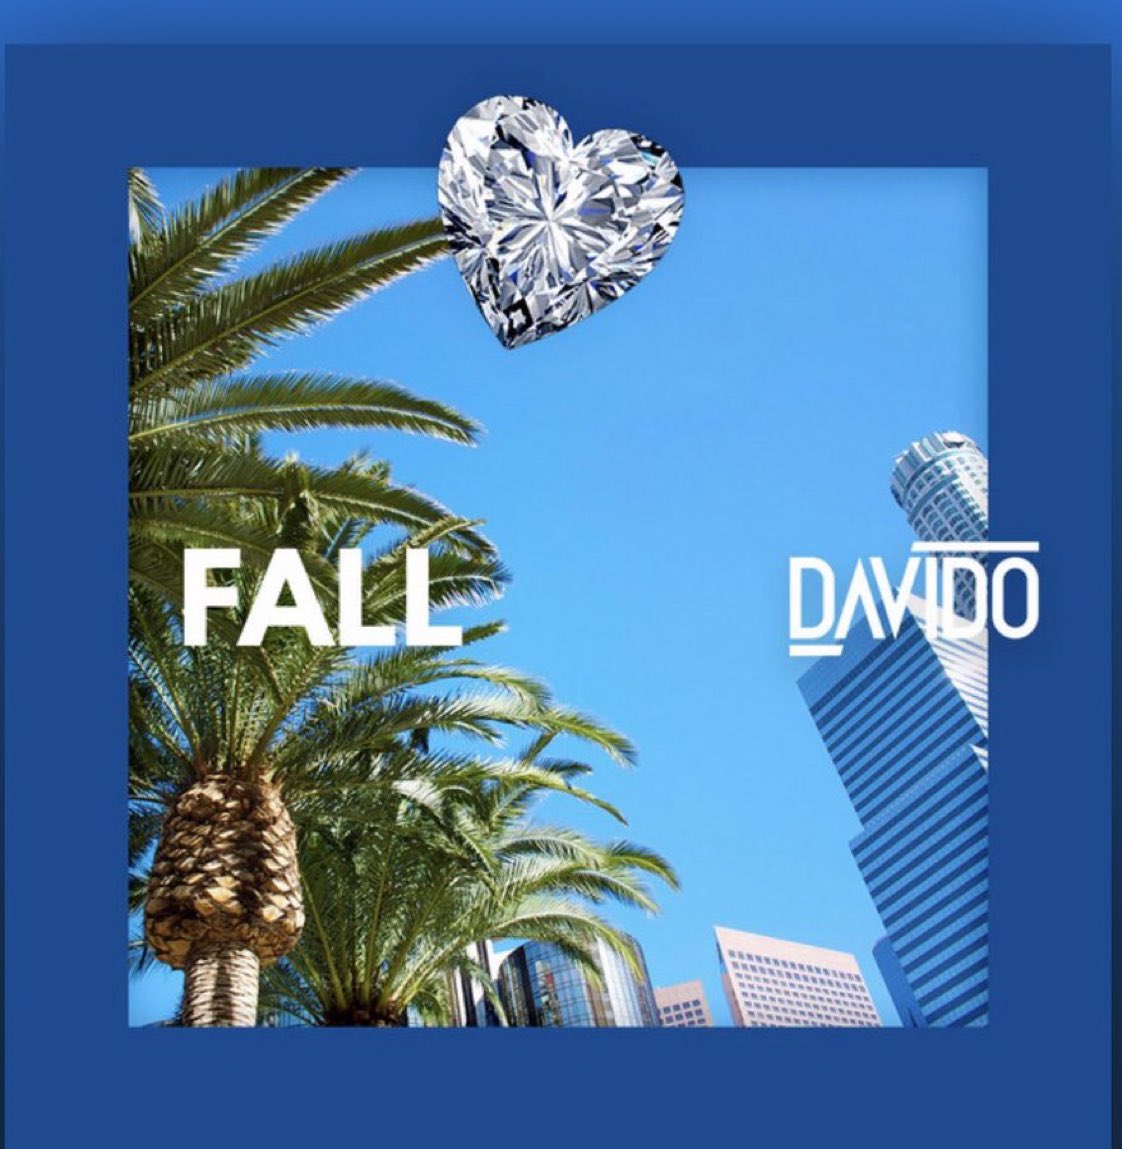 .@davido’s “FALL” has surpassed 100 Million streams on Spotify

— It’s his first solo song to achieve this, 2nd overall.